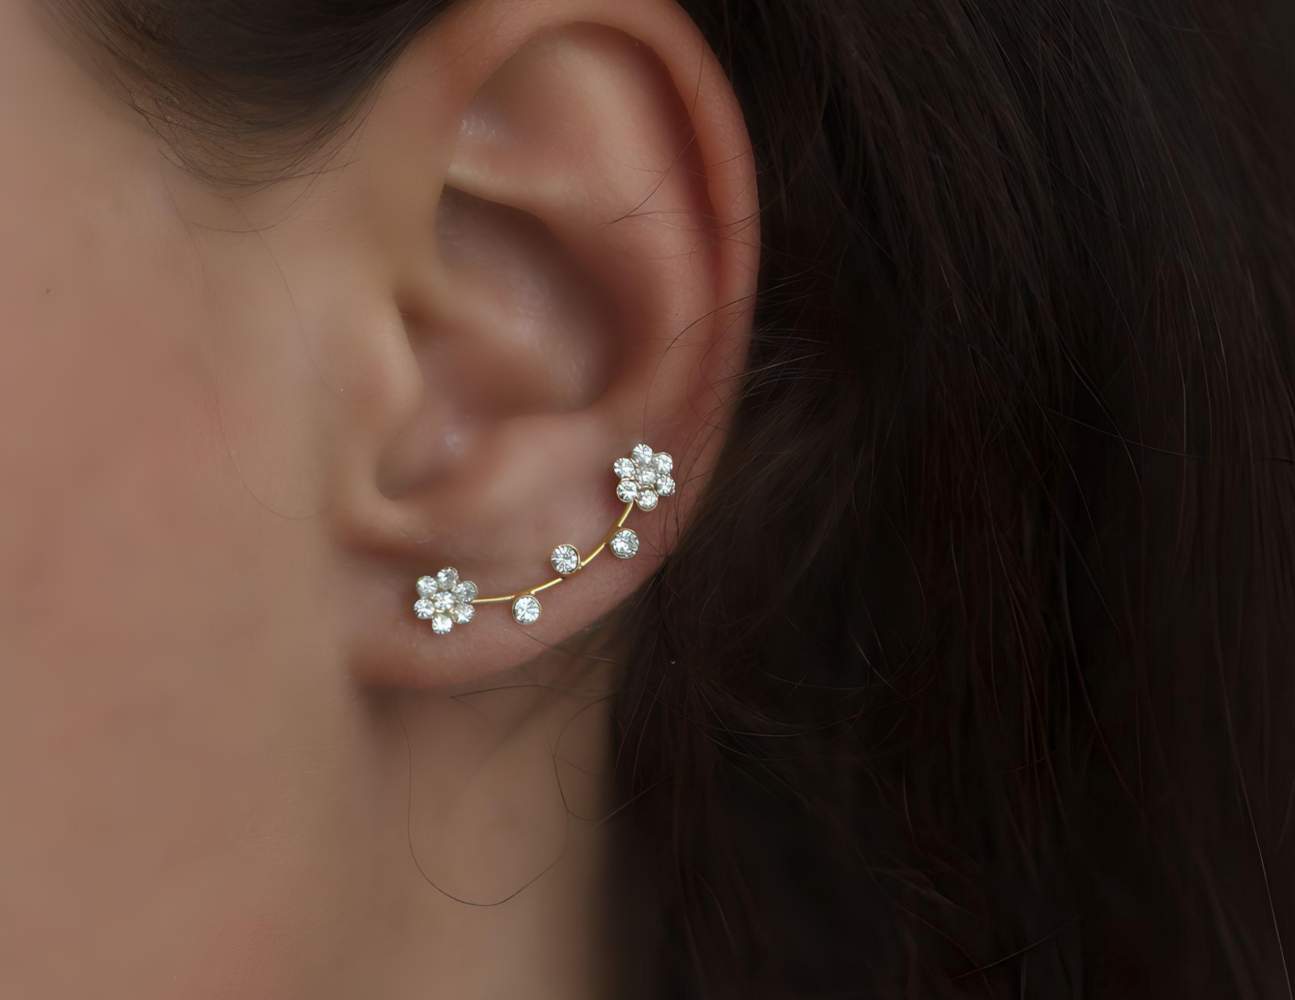 Offer of the month: Dainty flower ear climbers. Gold over sterling silver and white cz flowers